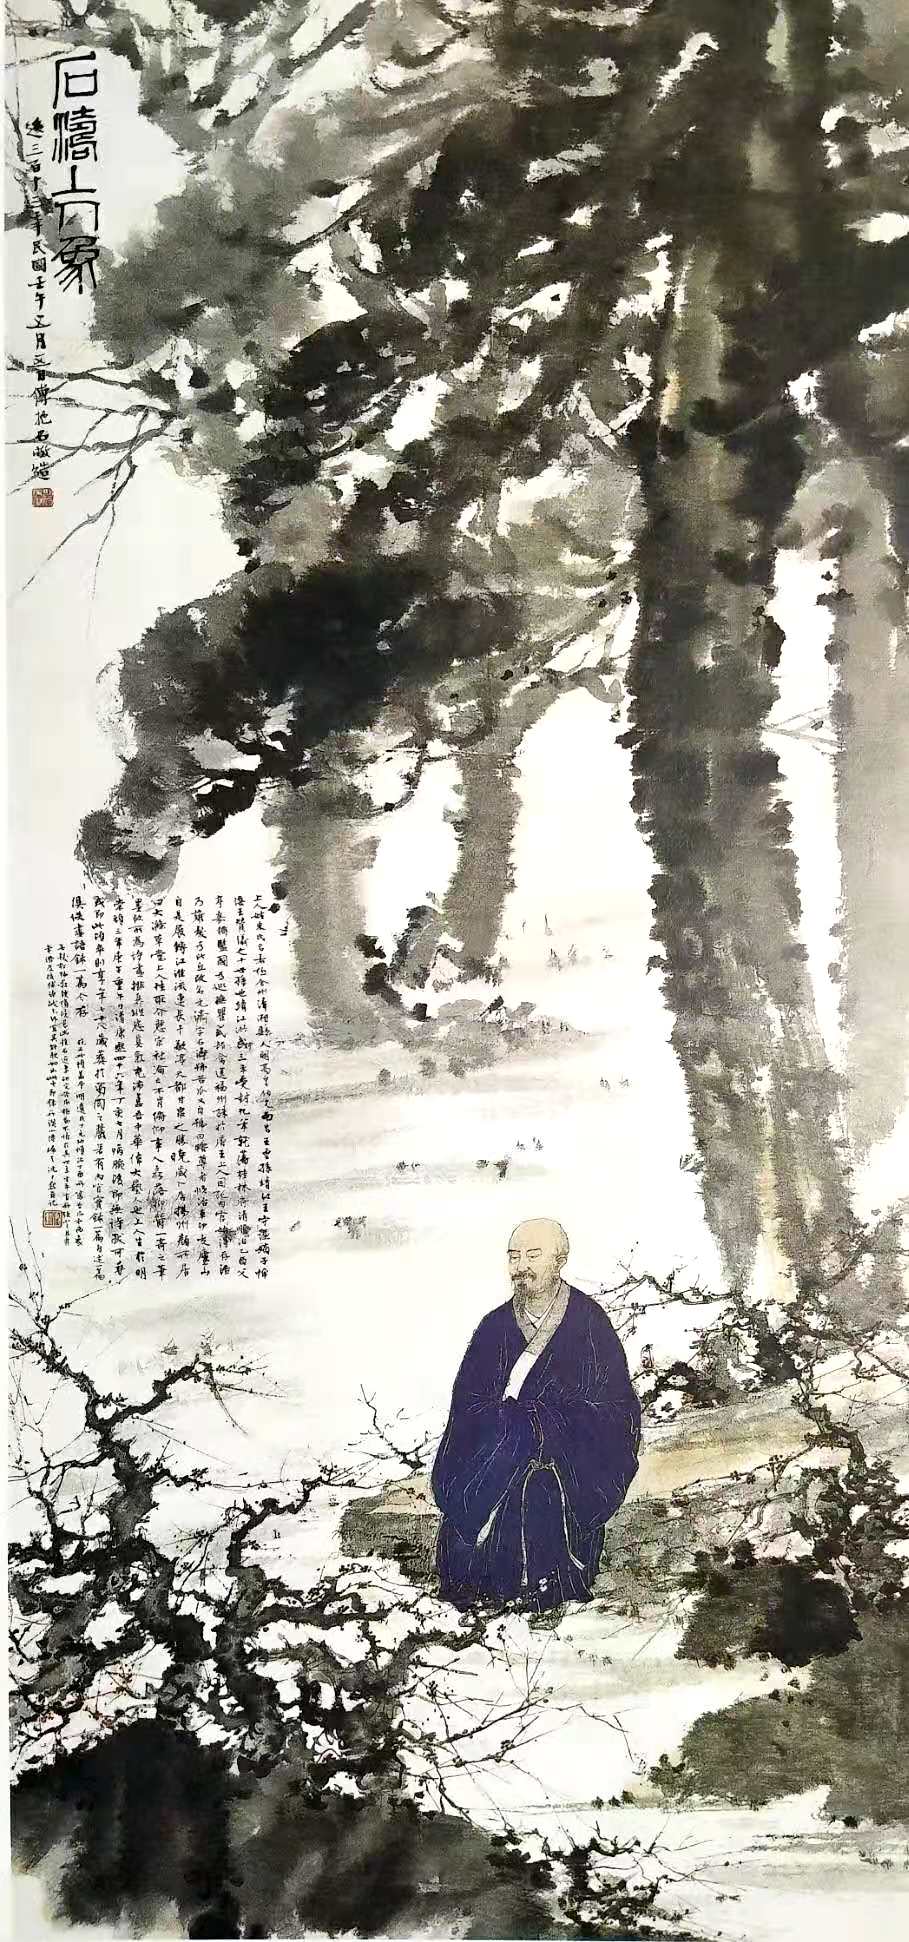 Energy in the Brush: Contemporary Chinese Ink Paintings at Cantor